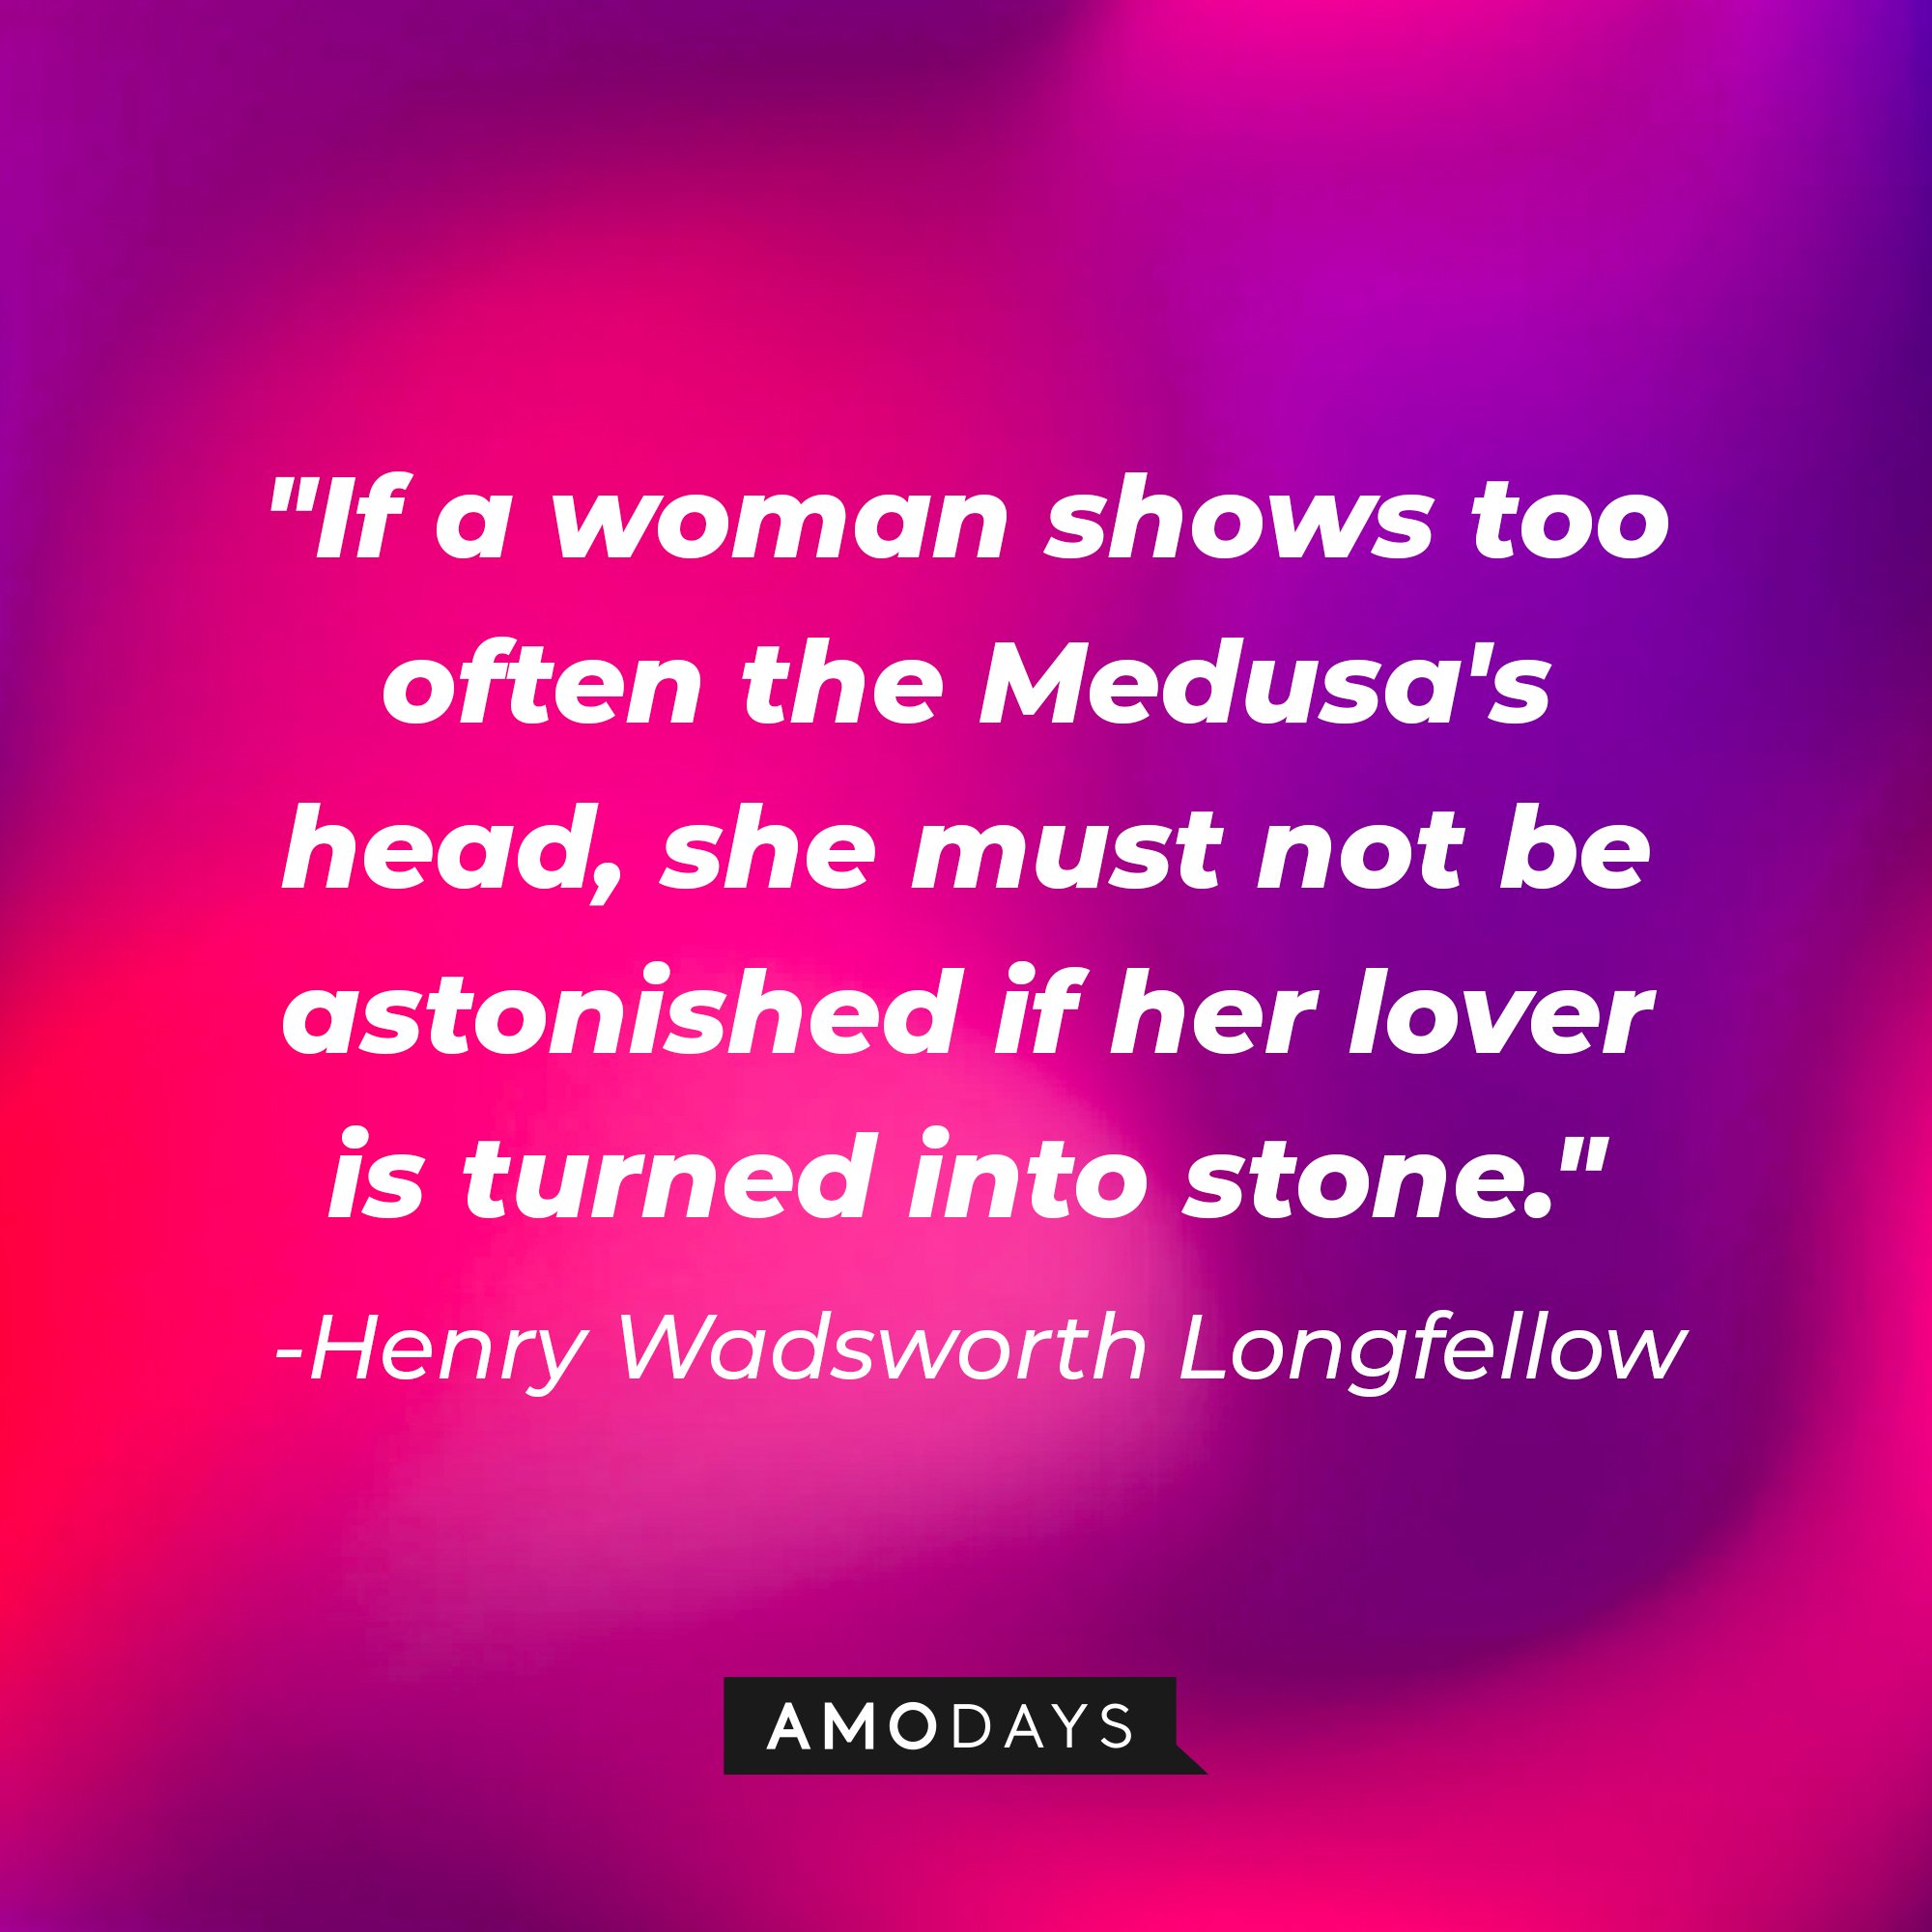 Henry Wadsworth Longfellow’s quote: "If a woman shows too often the Medusa's head, she must not be astonished if her lover is turned into stone." | Image: AmoDays